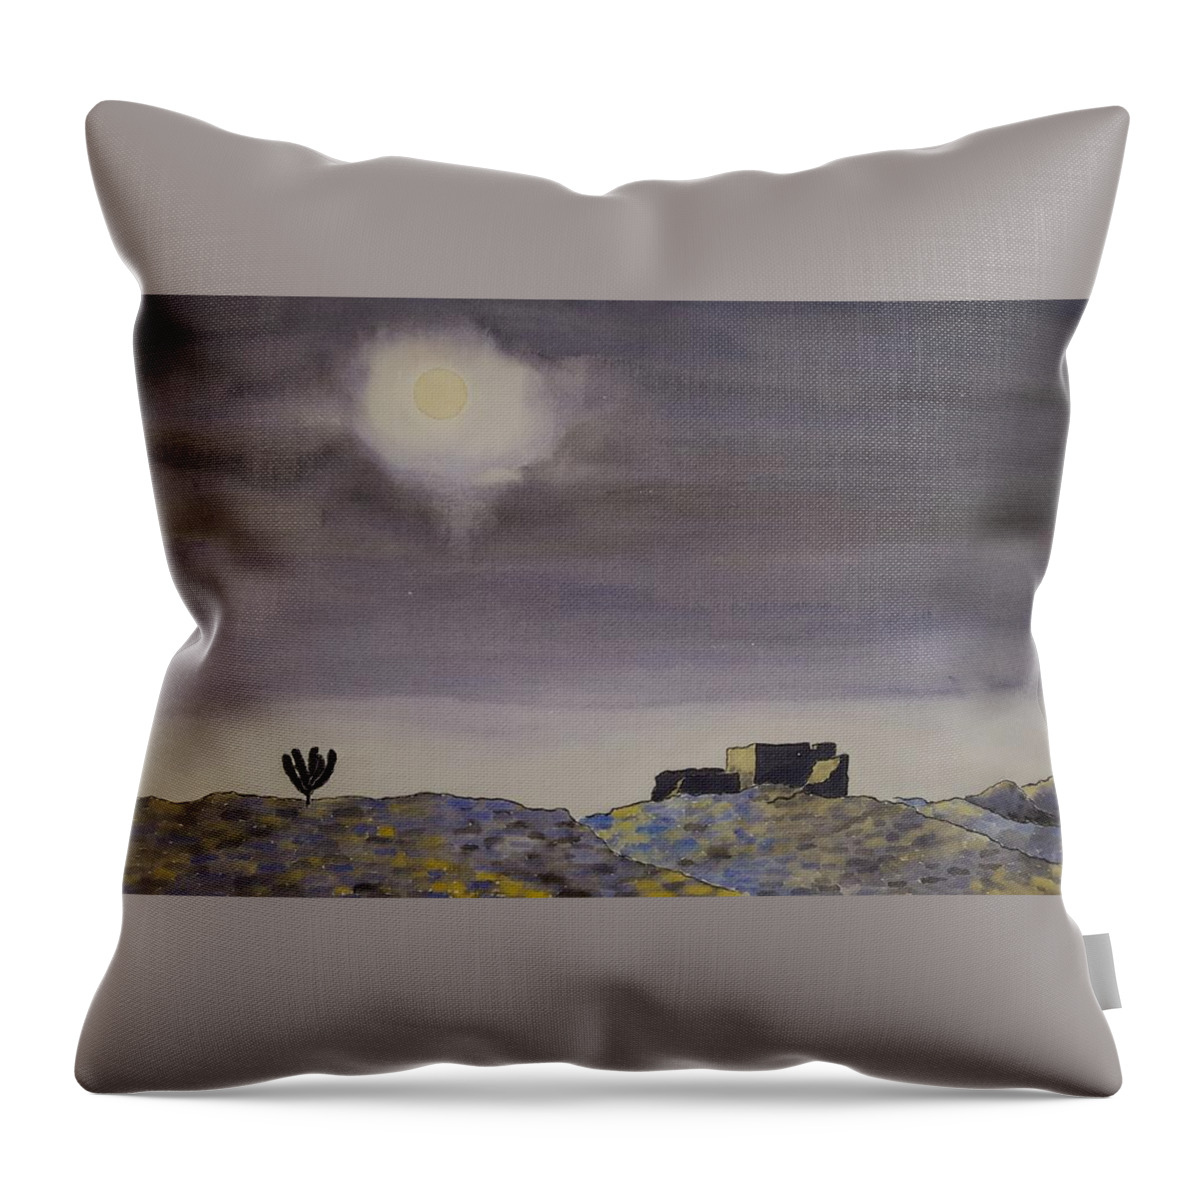 Watercolor Throw Pillow featuring the painting Desert Nightscape by John Klobucher